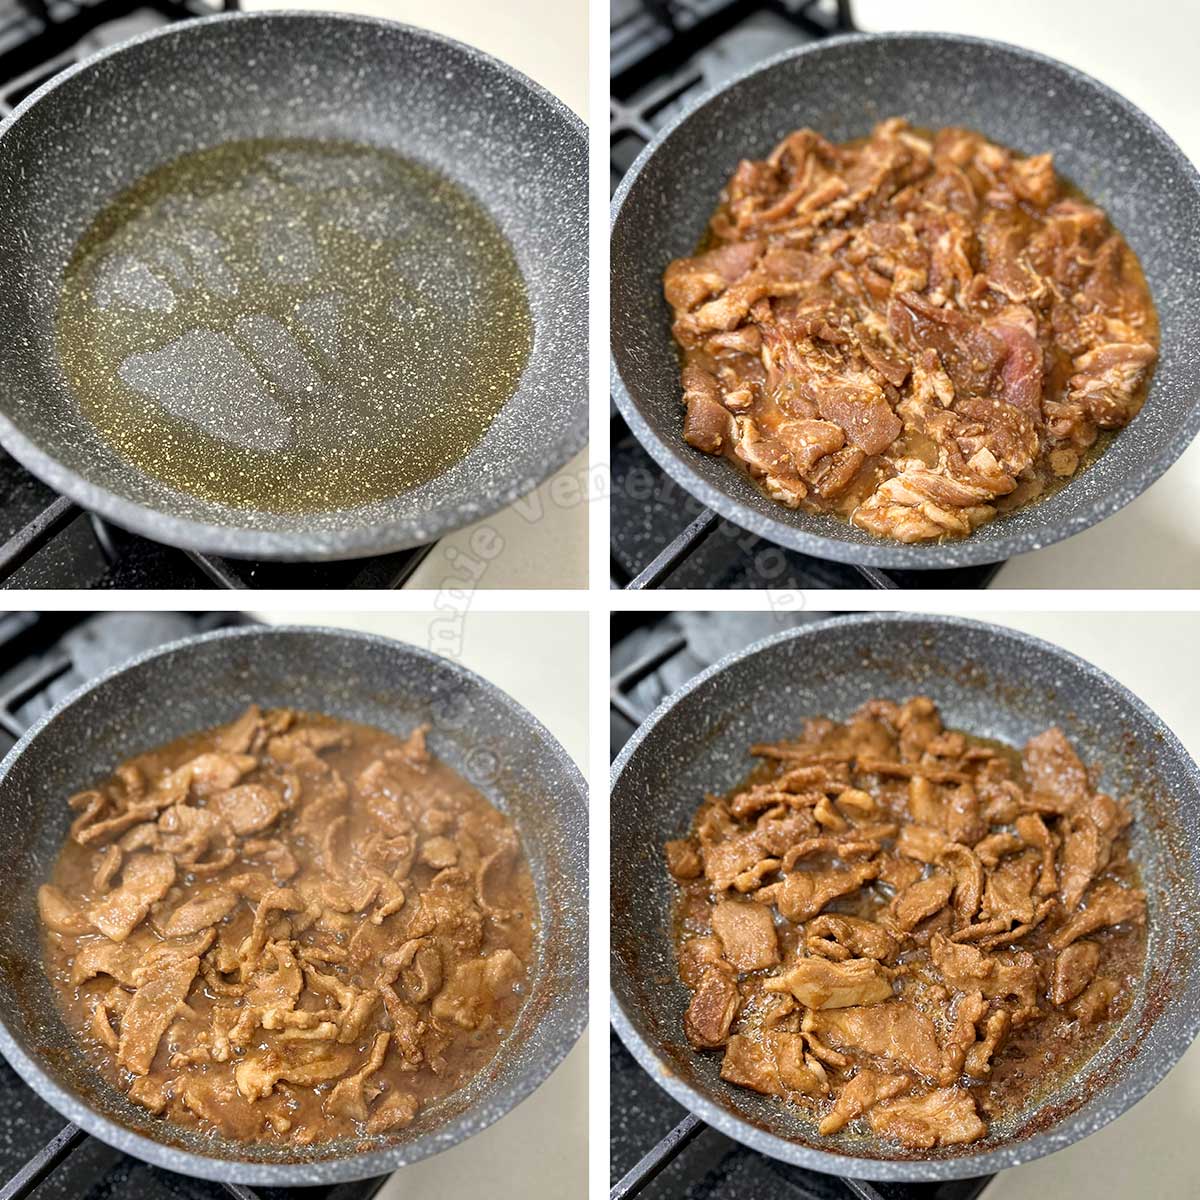 Frying marinated pork in sesame seed oil